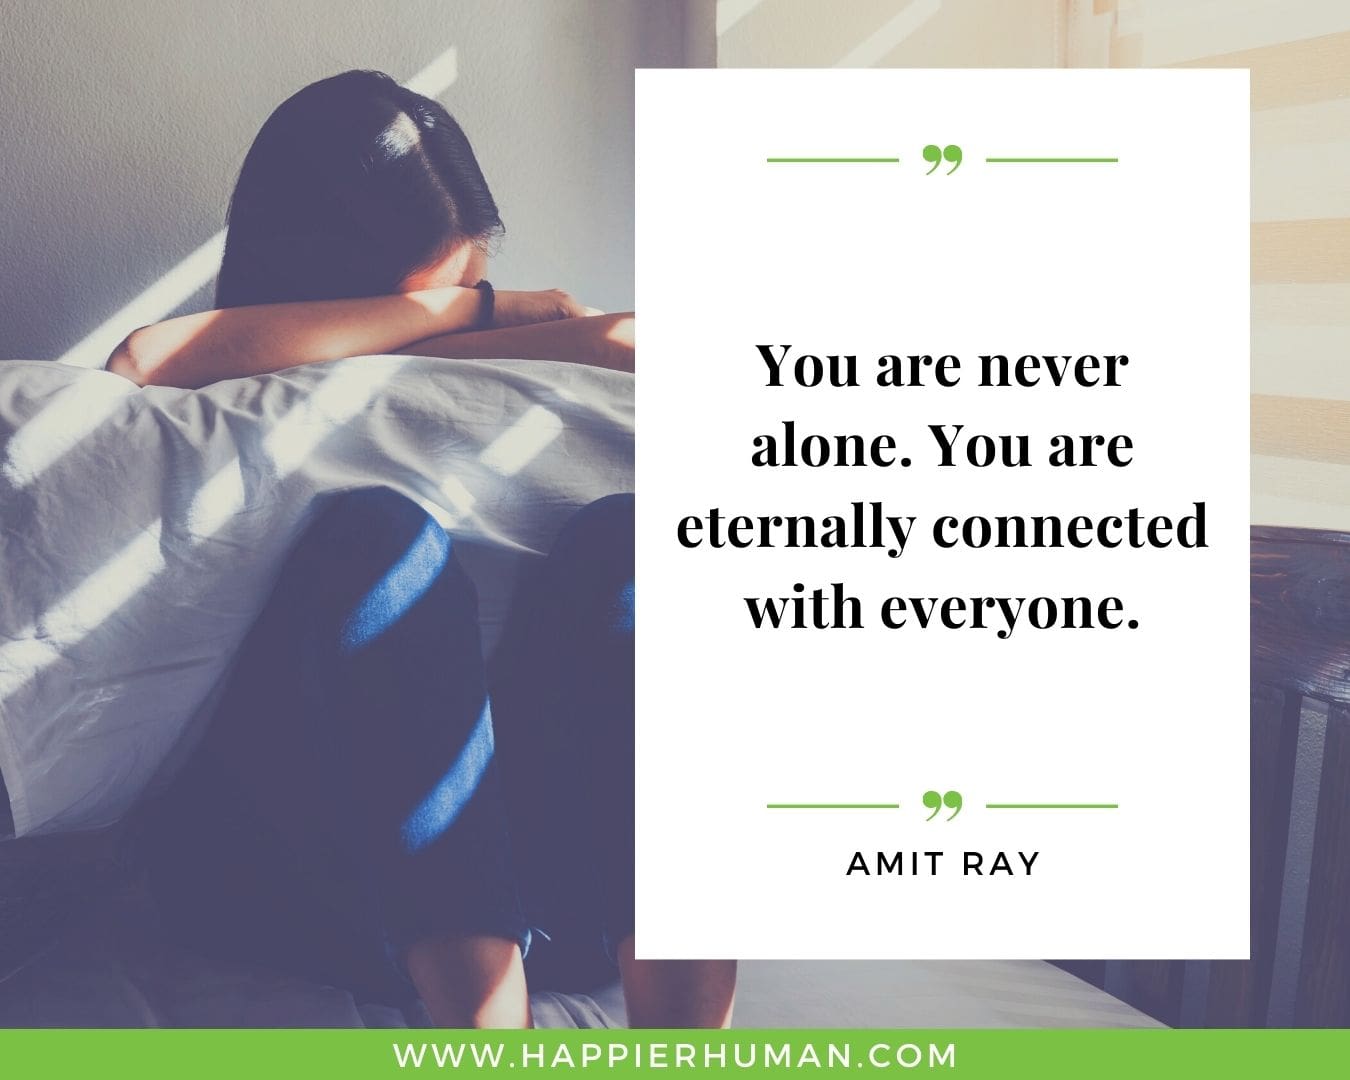 Loneliness Quotes - “You are never alone. You are eternally connected with everyone.” – Amit Ray